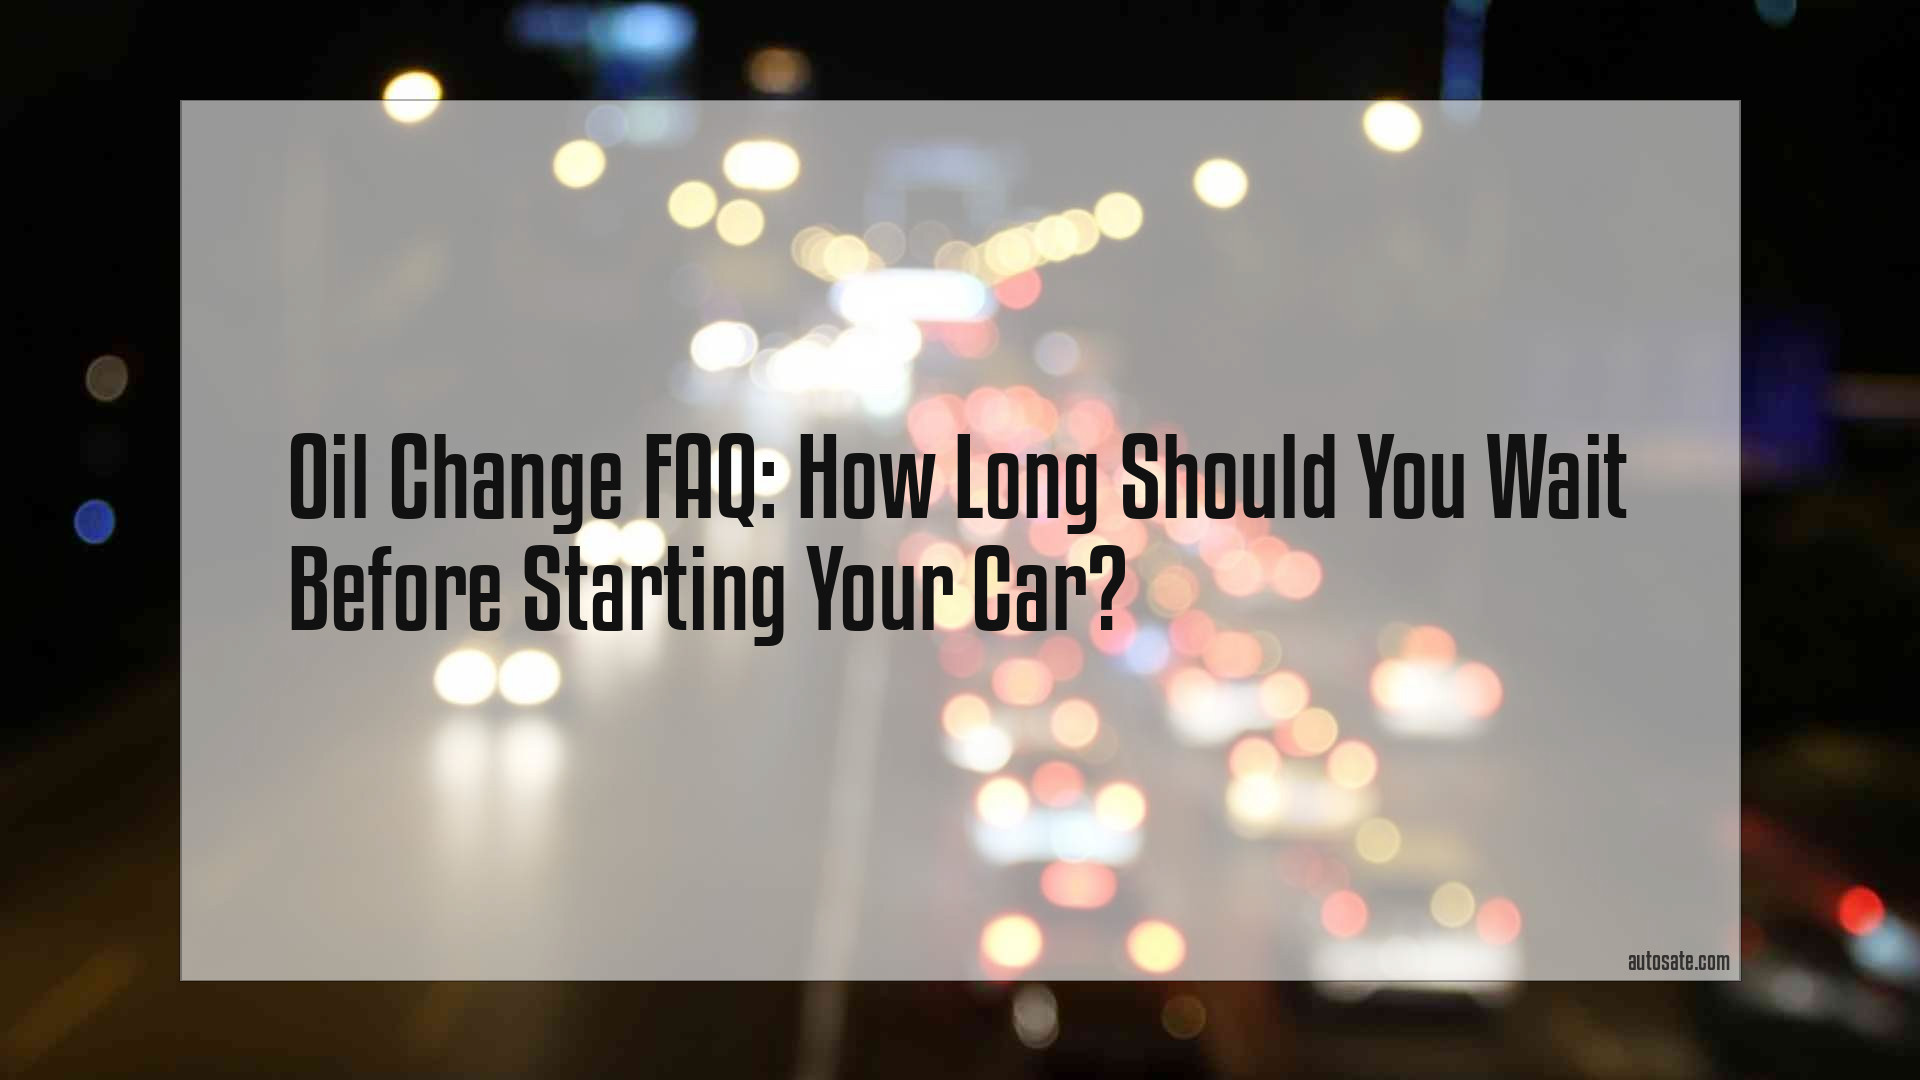 Oil Change Faq: How Long Should You Wait Before Starting Your Car?